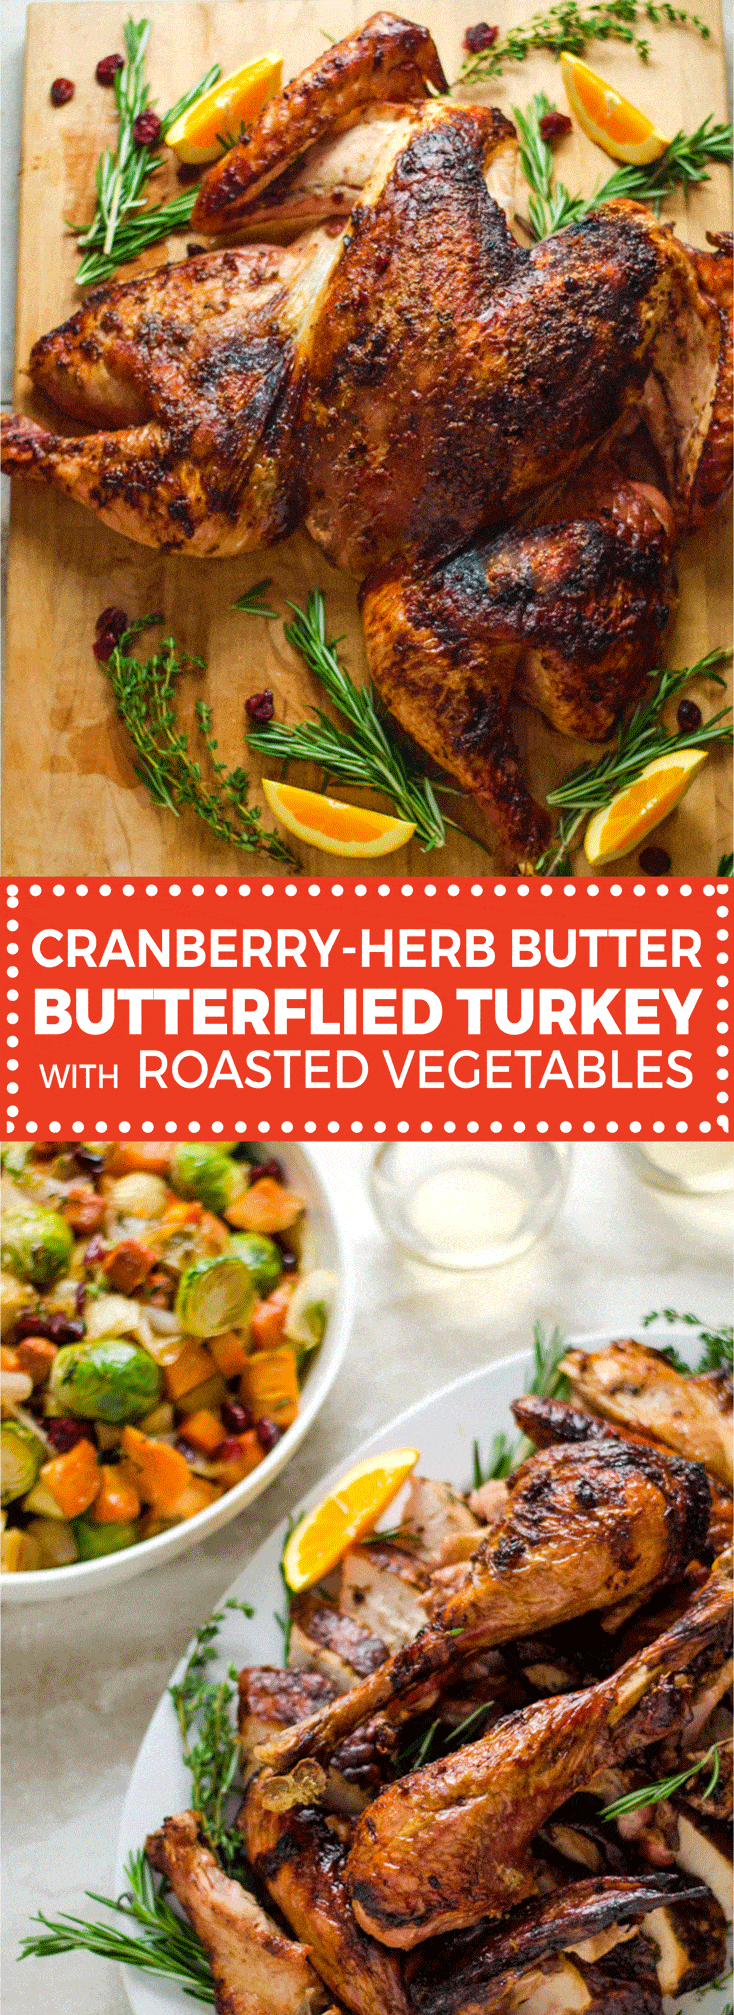 Crispy Cranberry-Herb Butter Butterflied Turkey with Roasted Vegetables. Want flavorful turkey with ultra-crisp skin and juicy meat? Want it faster than your traditional Thanksgiving bird? WITH roasted veggies? Well, here you go. | hostthetoast.com